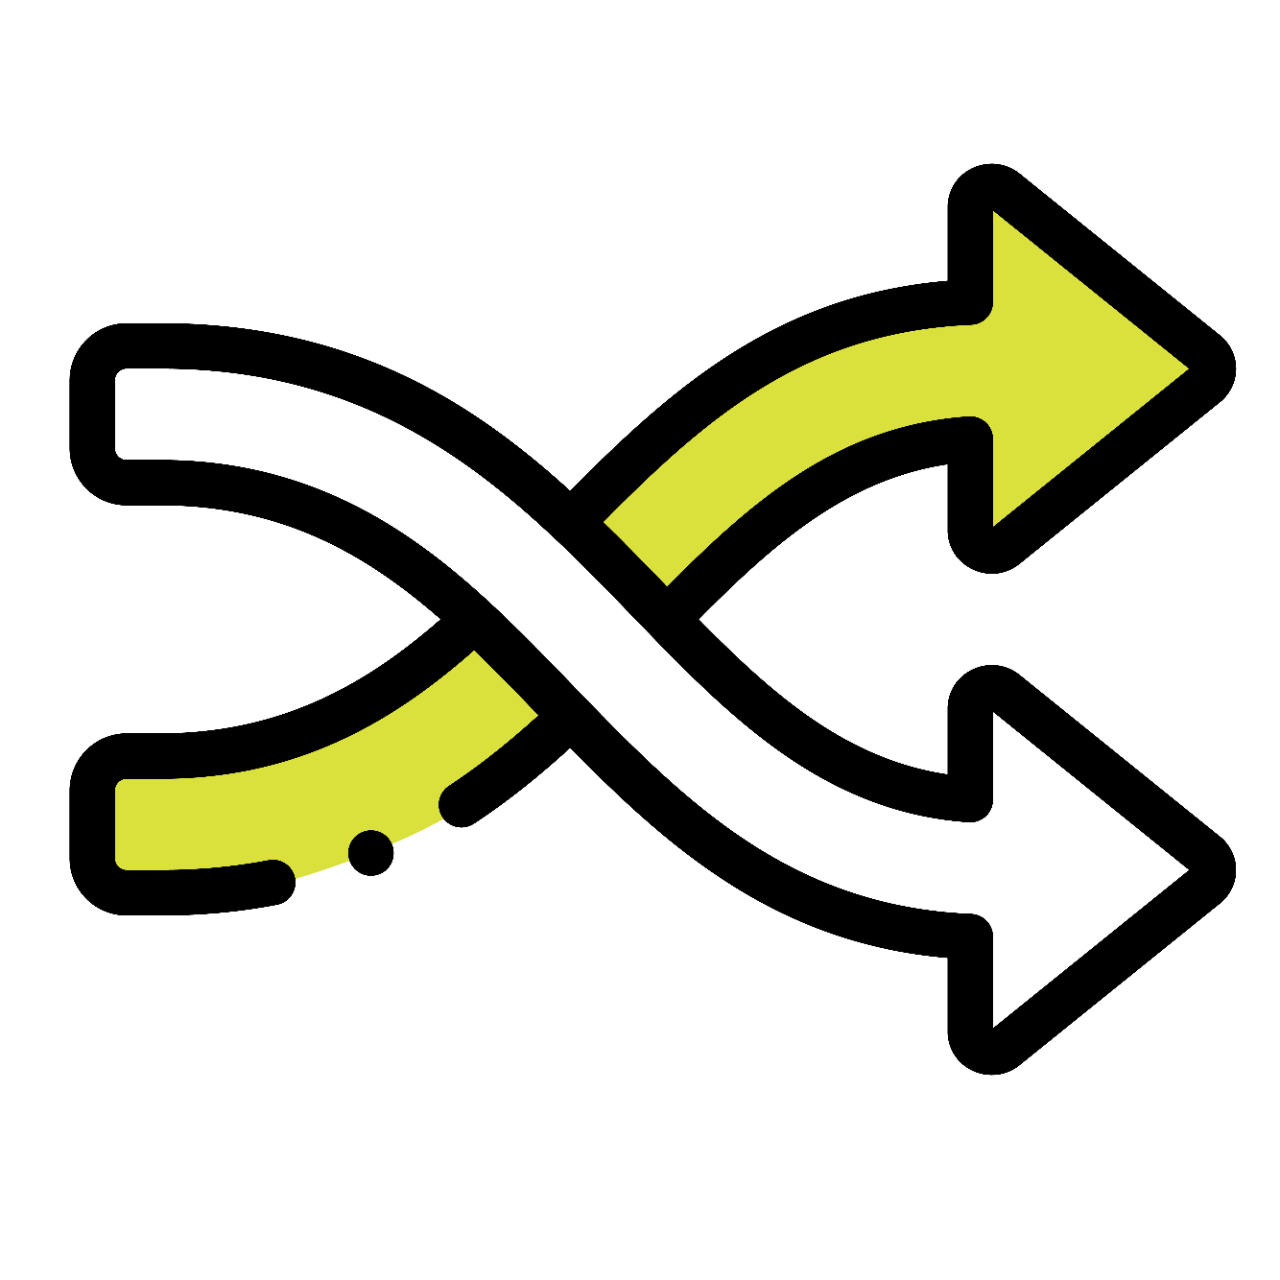 intertwined arrows icon